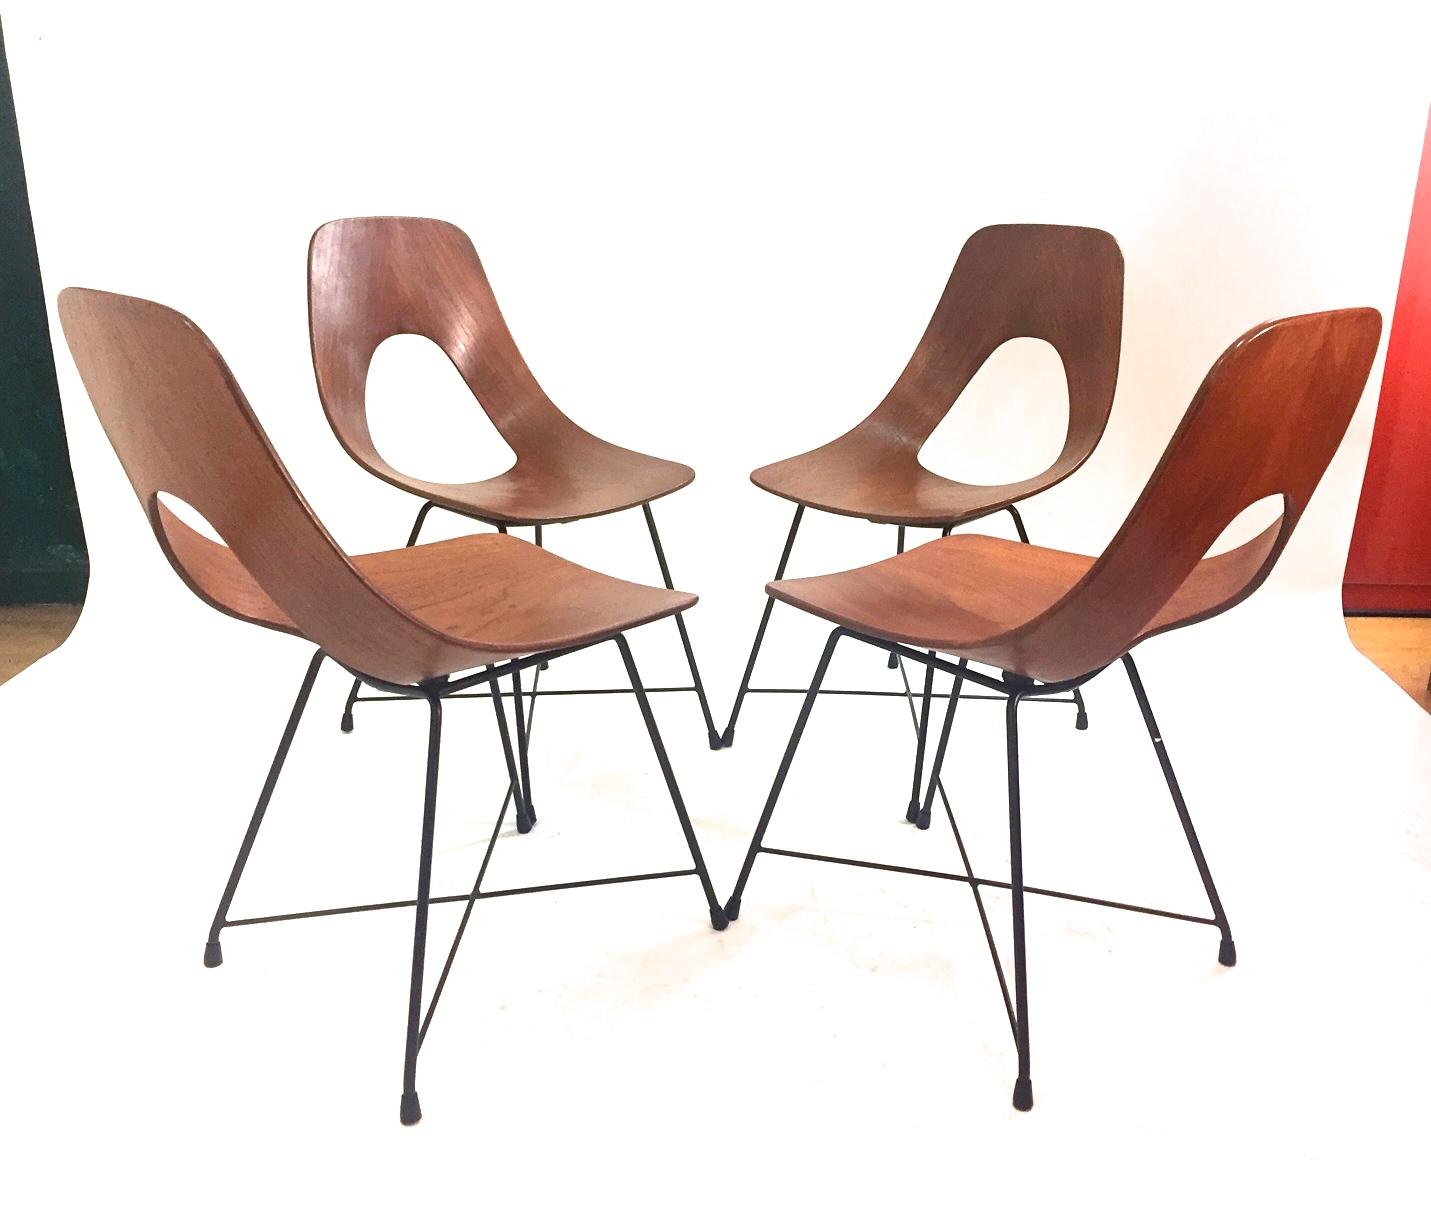 A superb set of four Ariston chairs designed by Augusto Bozzi in 1957 and edited by Saporiti. Frame of solid blend Plymouth teak, spider and solid black coated steel base. Marked 